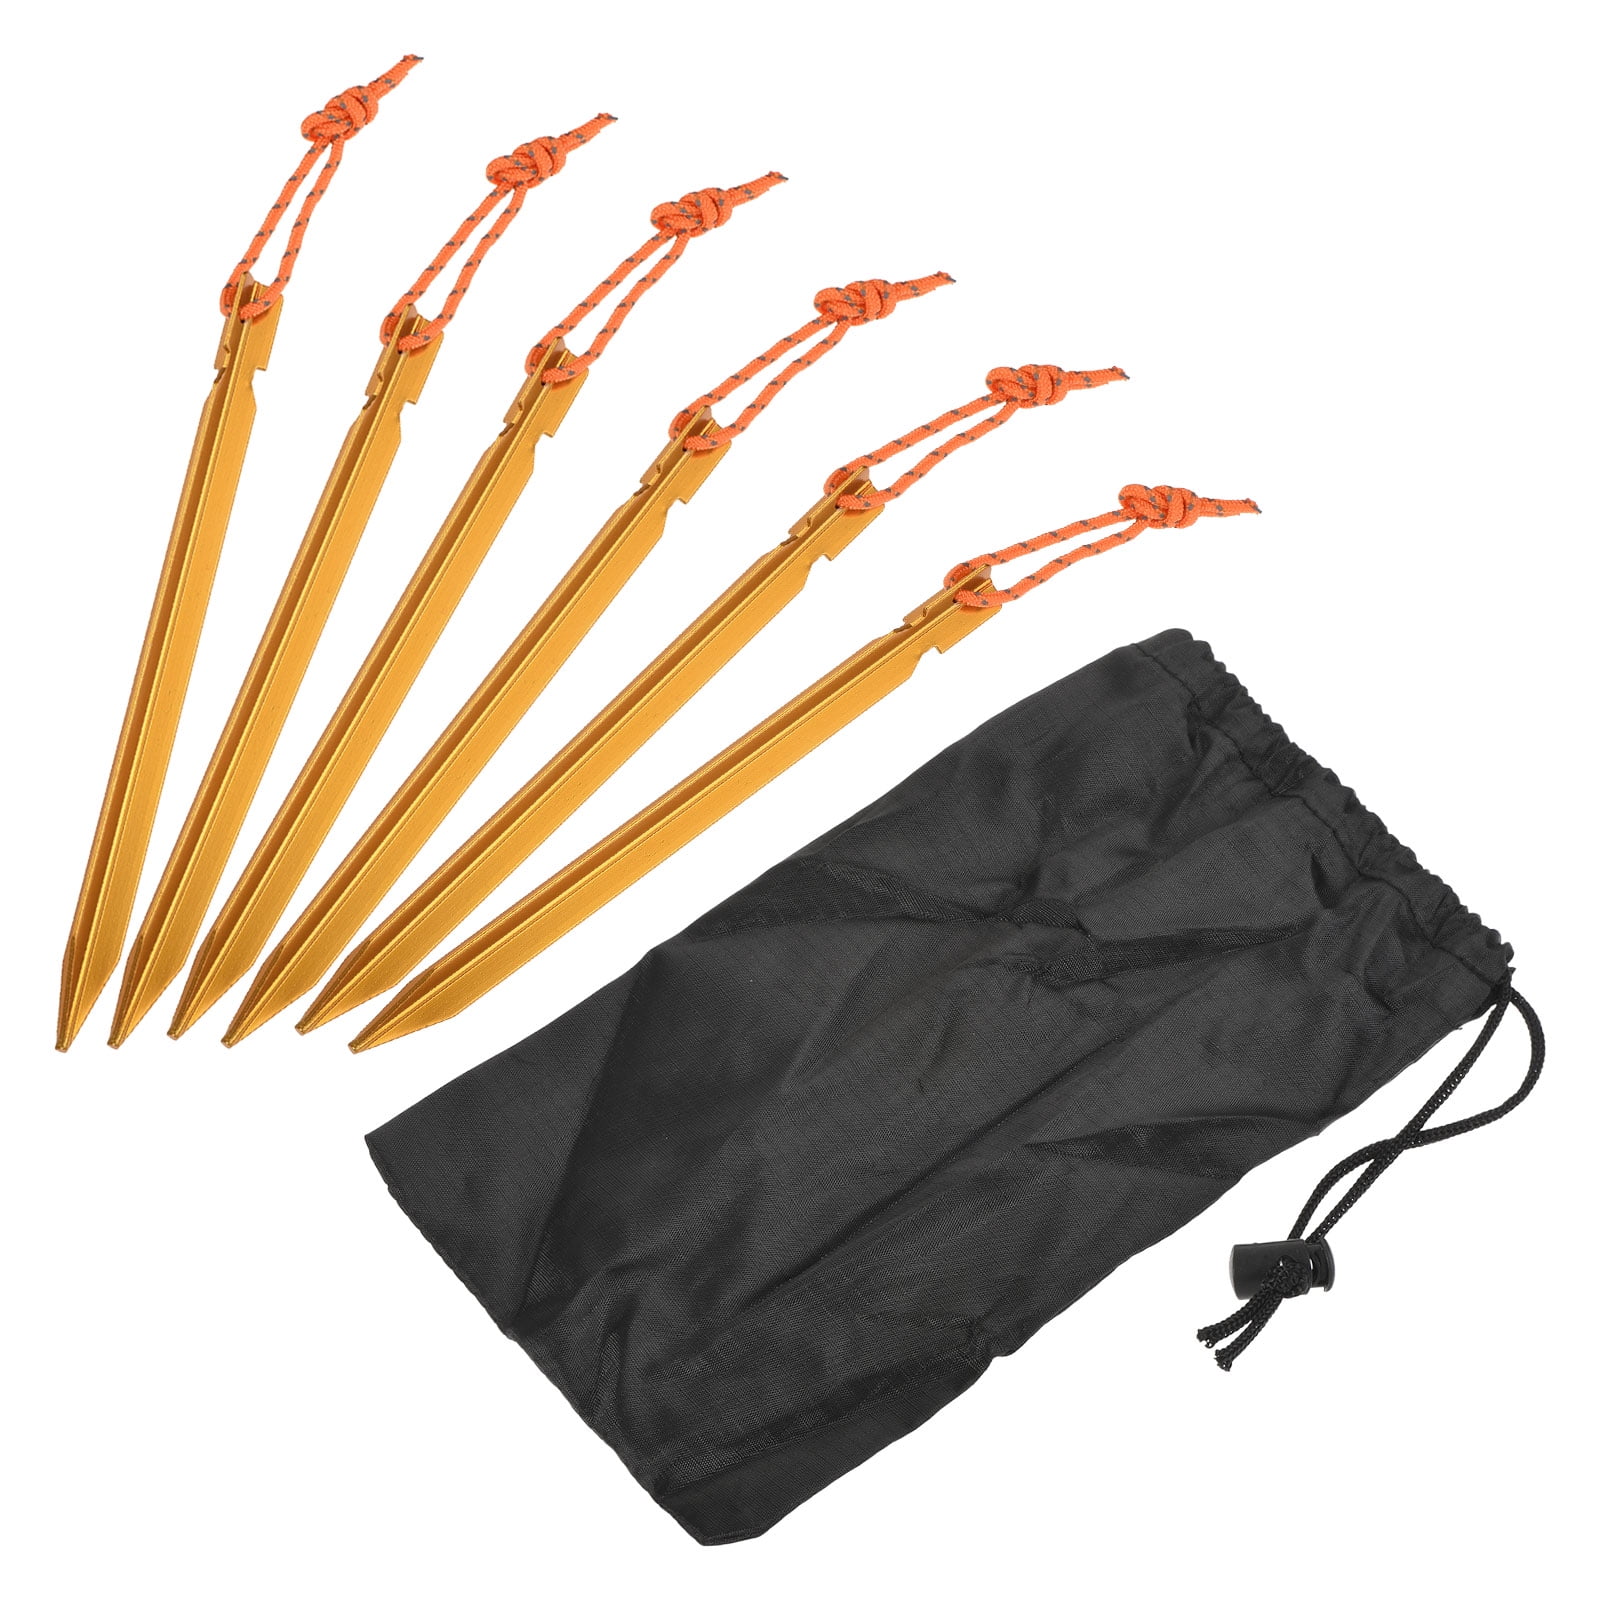 6x Ultralight Aluminum Tent Three-Sided Y-Beam Pegs with Storage Bag Hiking 